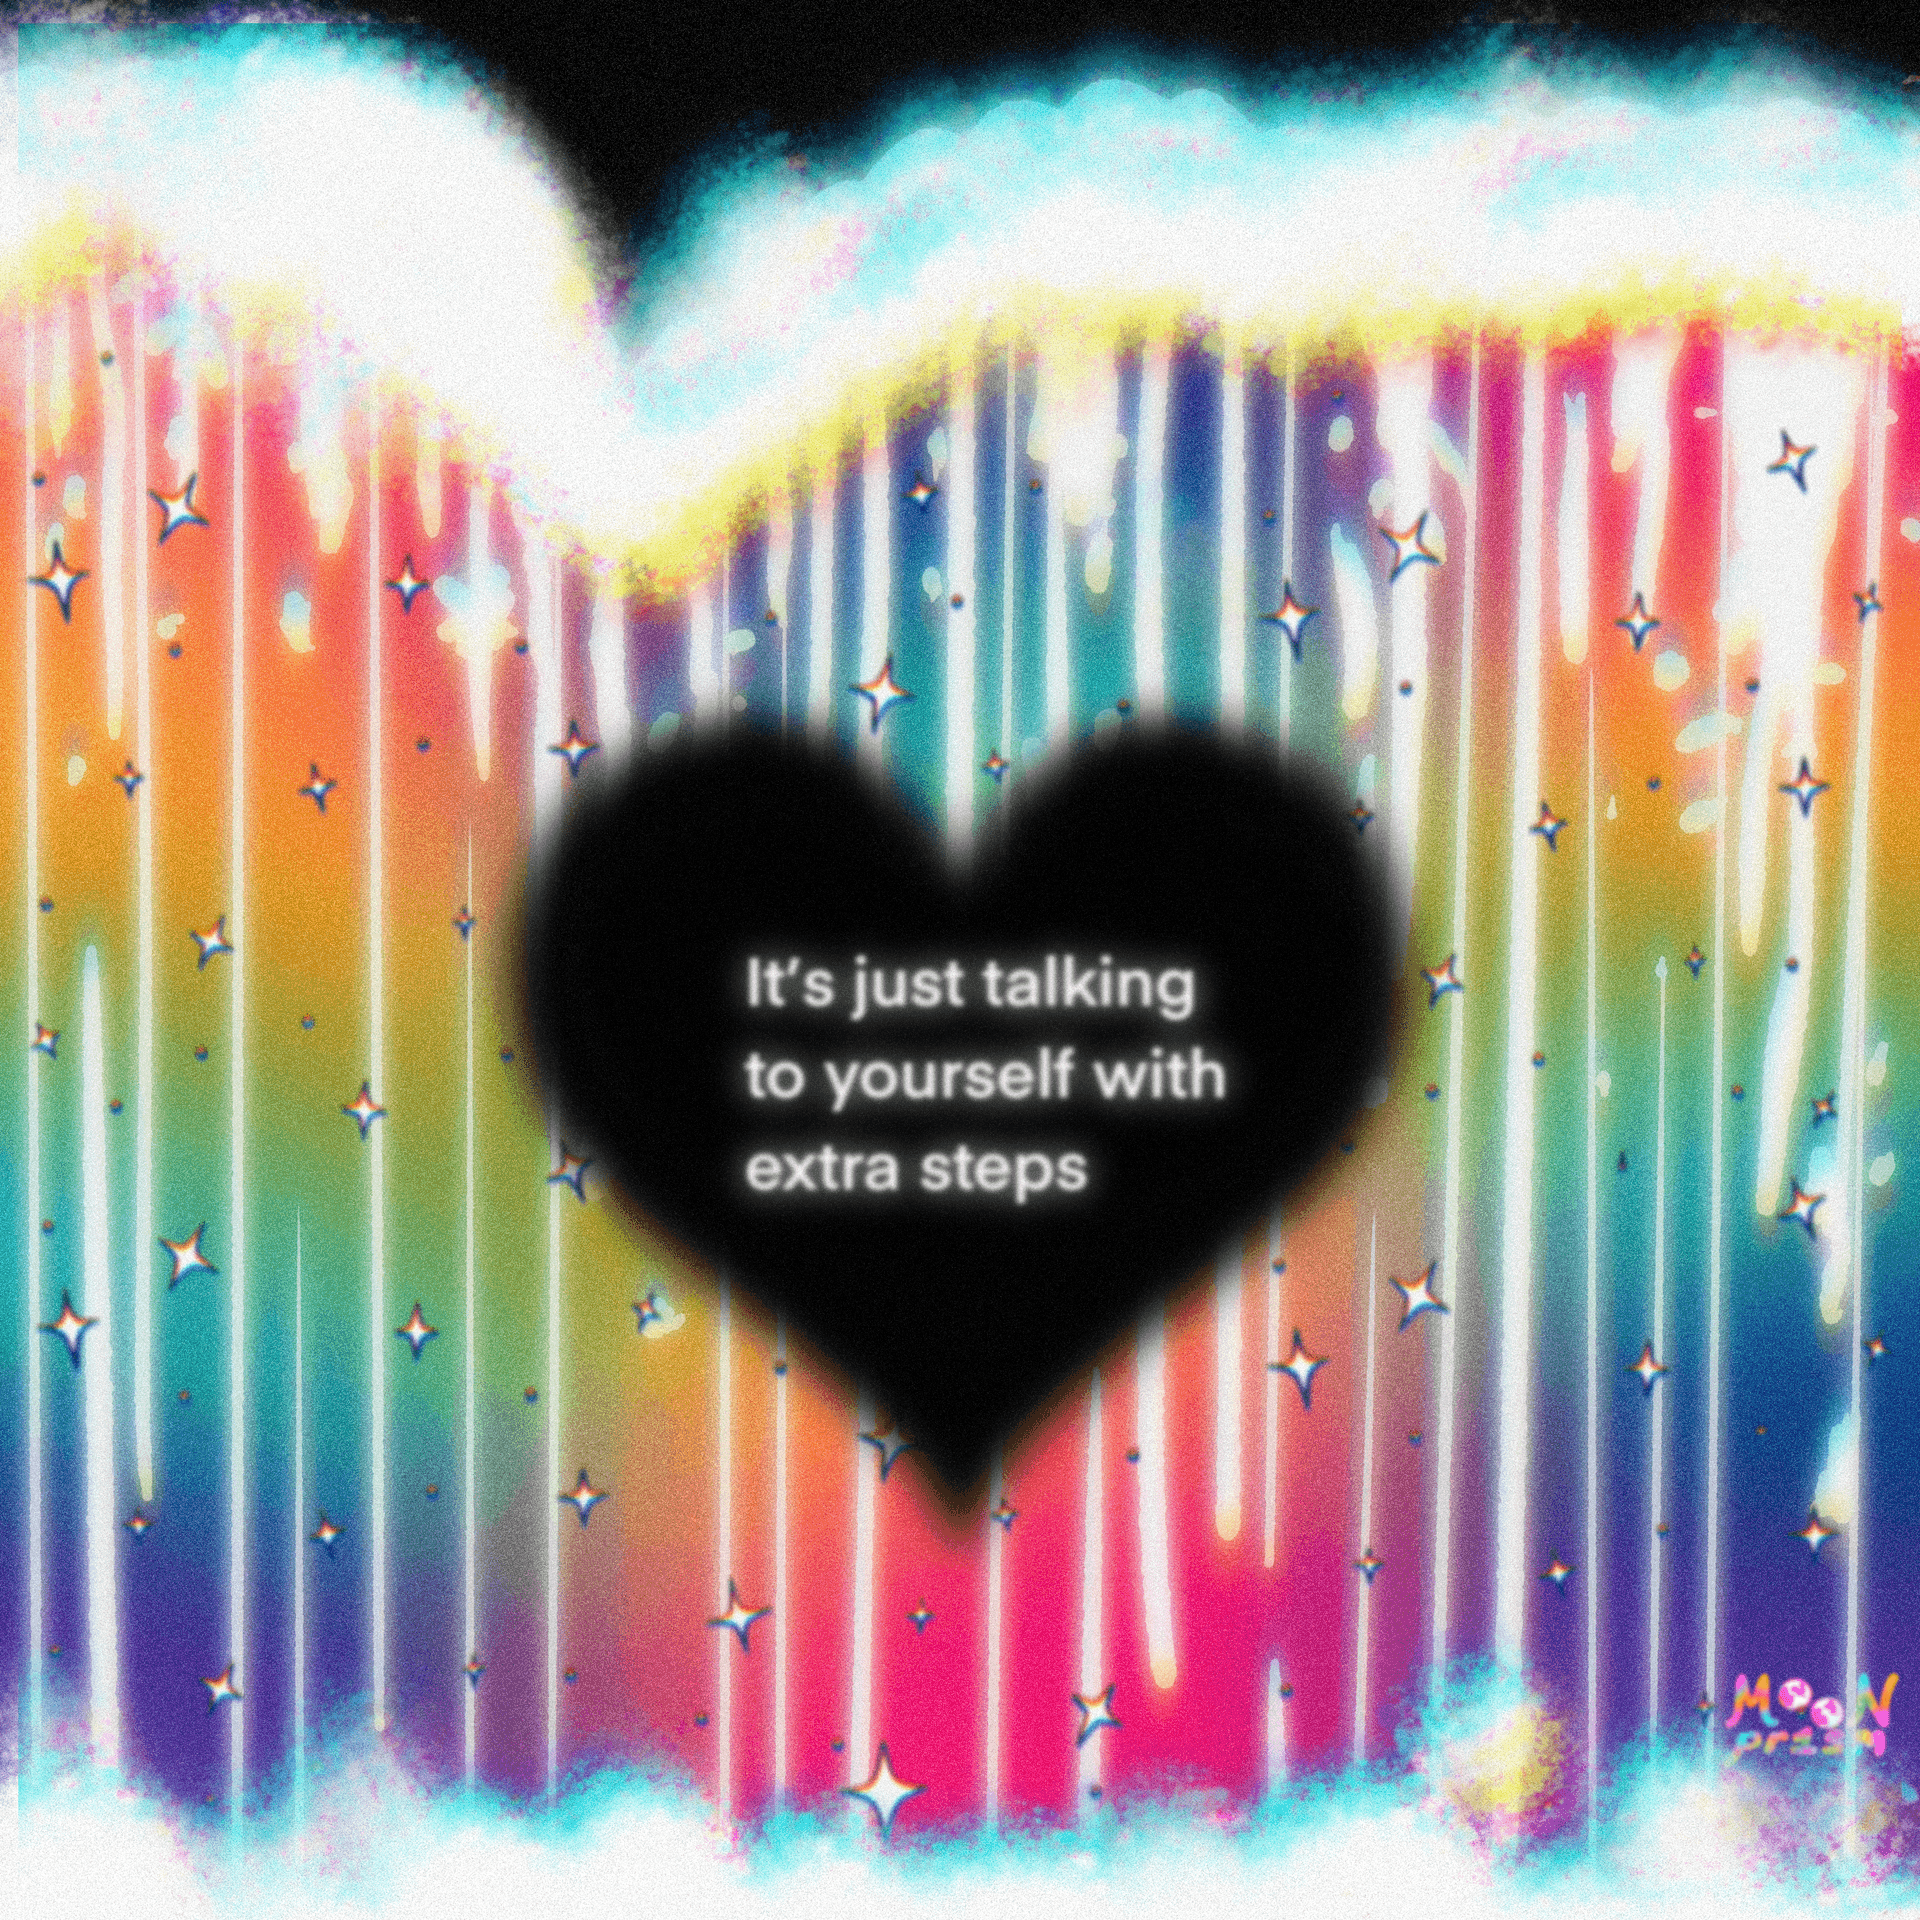 An illustration of a rainbow waterfall with a black heart in the middle that says 'It's just talking to yourself with extra steps.'